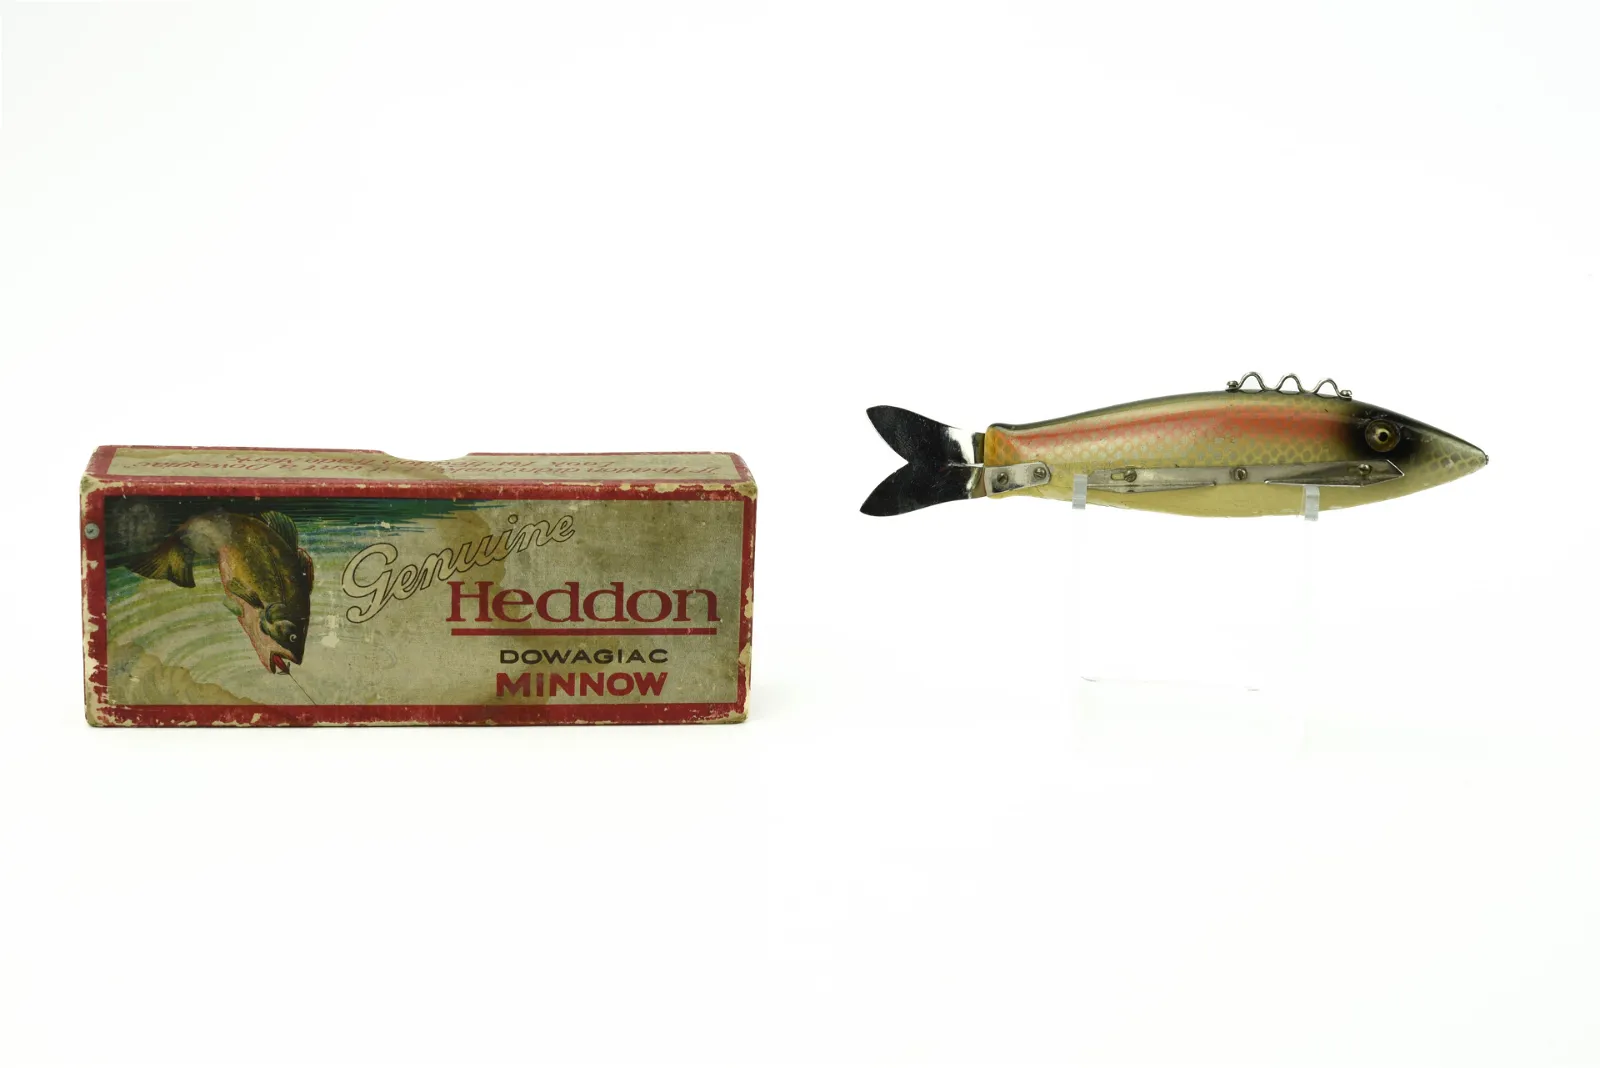 Vintage fishing lures attracted and caught angling bidders at Blanchards